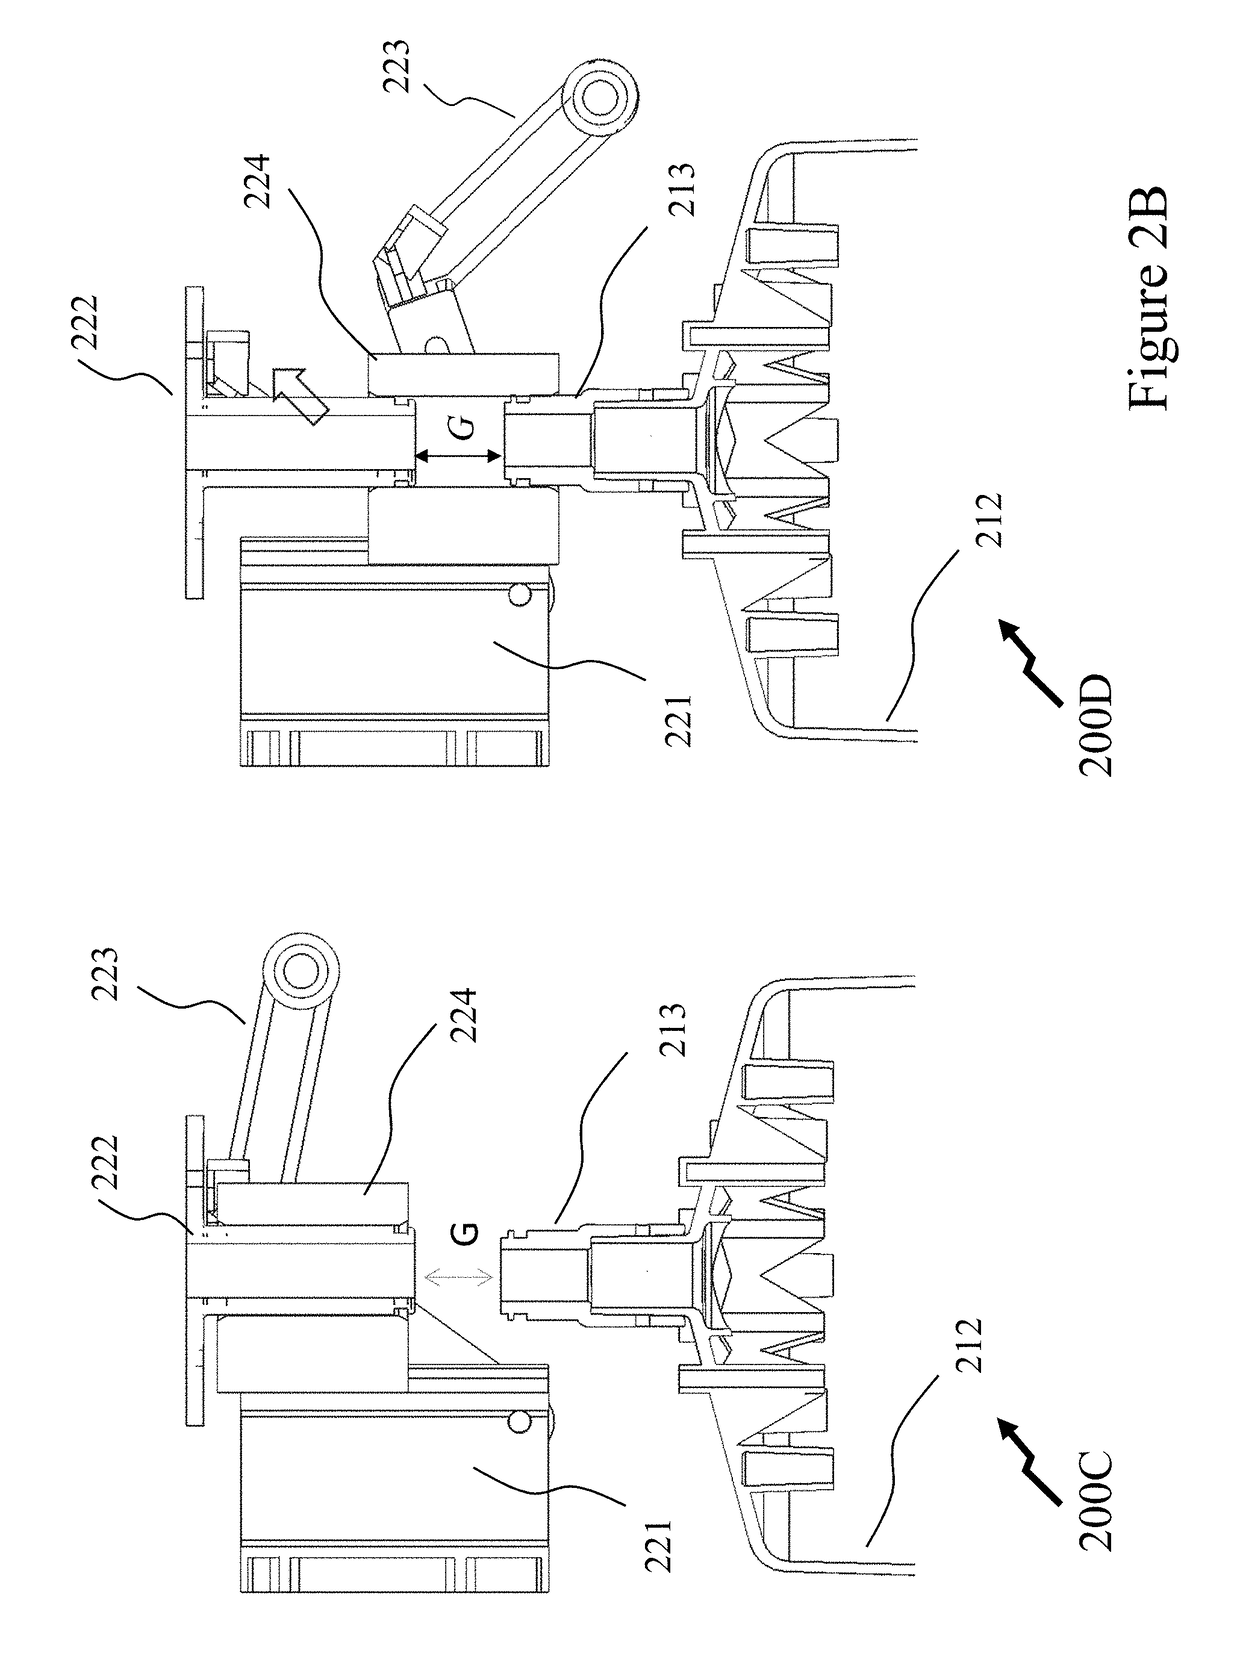 Field replaceable fluid element methods and systems for fluidic processors